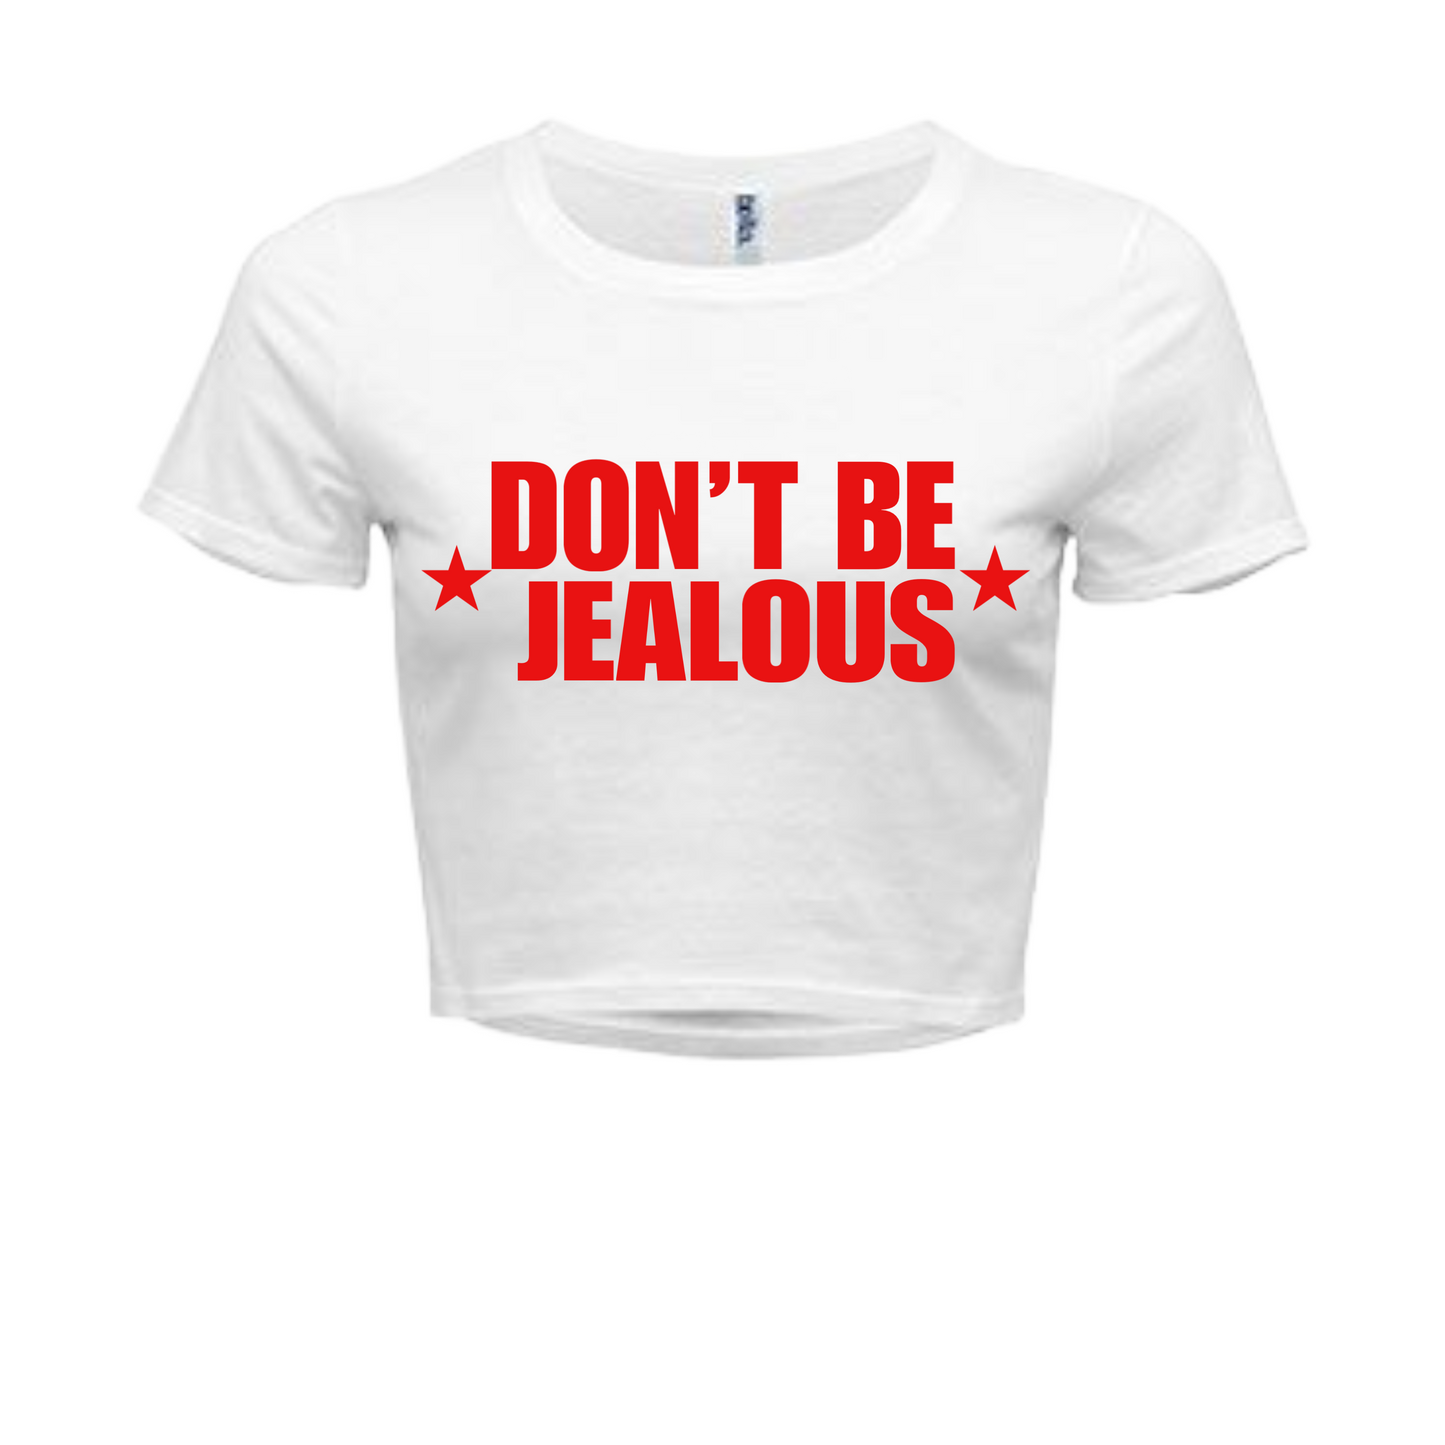 DON’T BE JEALOUS baby tee